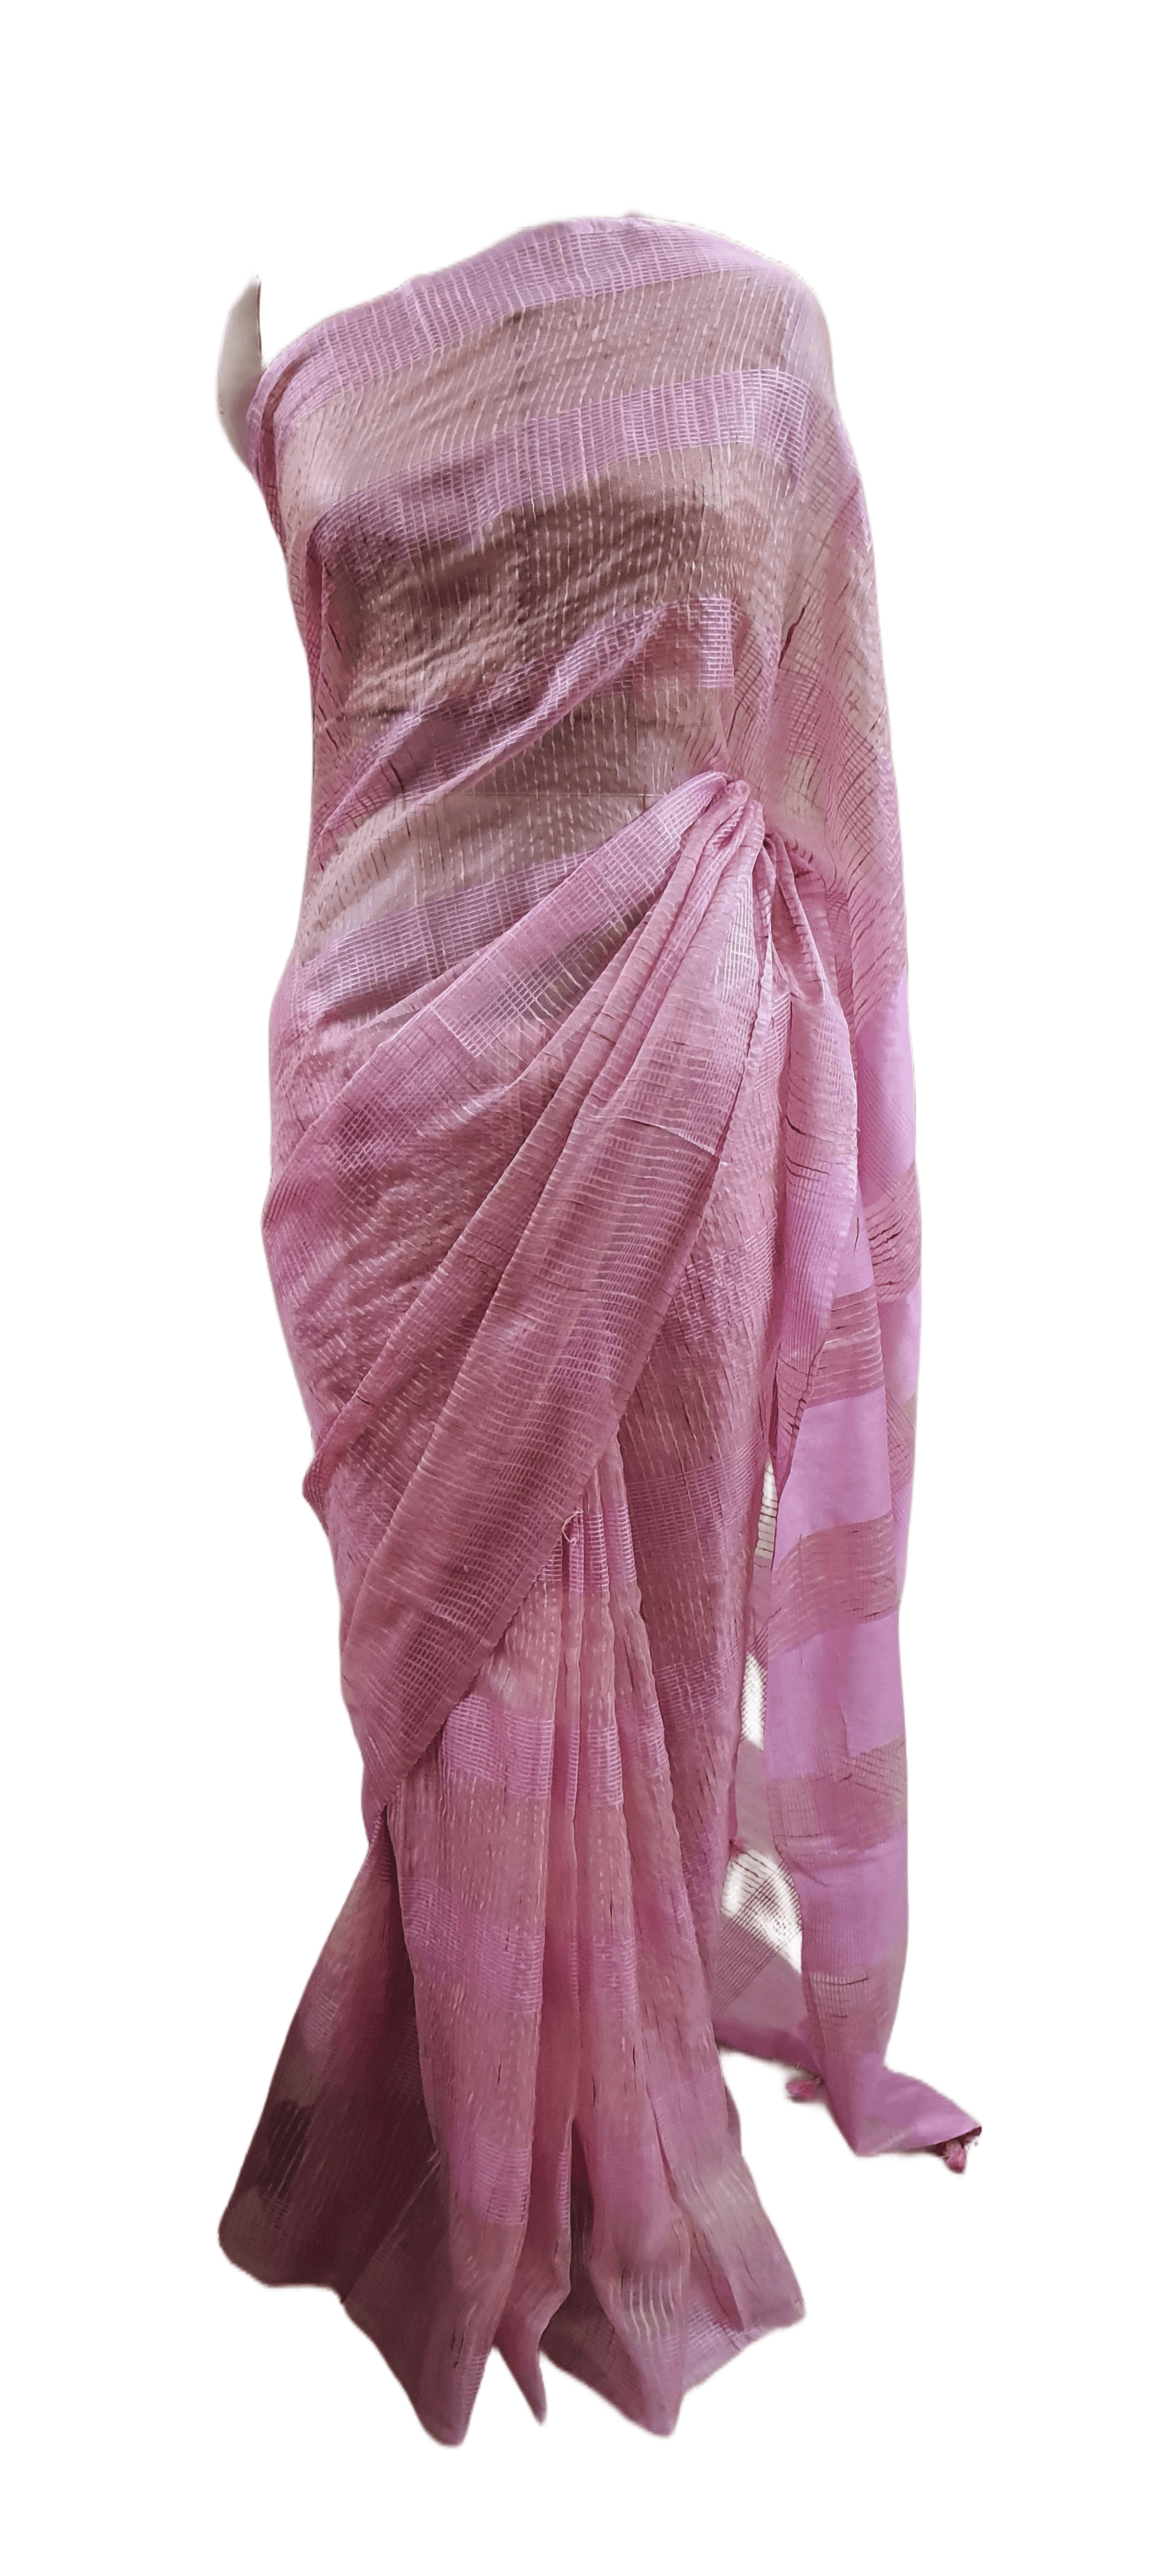 Pink Katan Ghicha Saree with Pure Ikkat Silk Blouse KG10 - Ethnic's By Anvi Creations